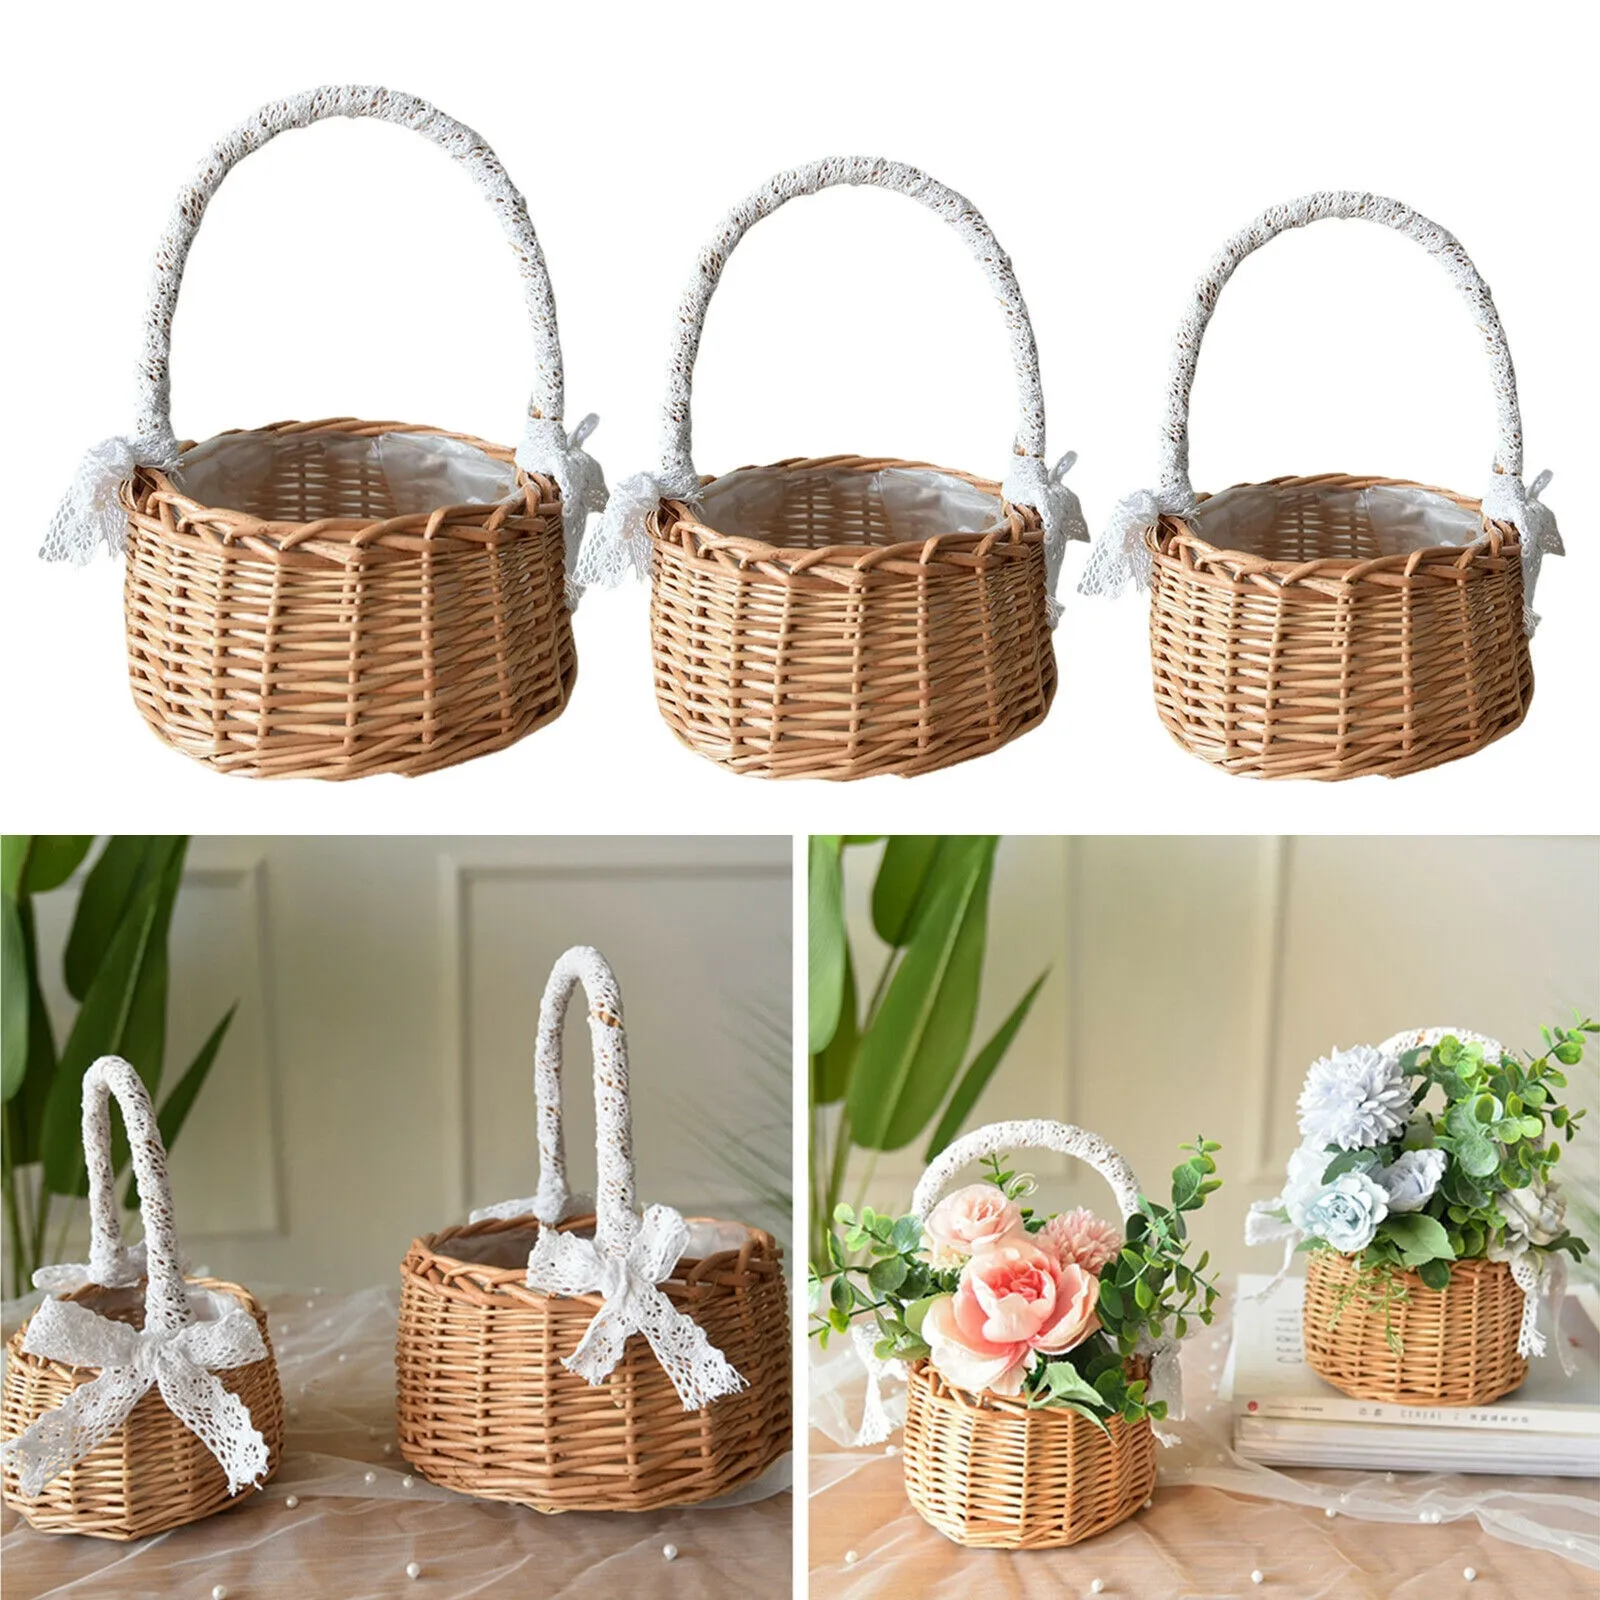 S Gernian Woven Flower Basket Rattan Storage Basket Flower Girl Hand Basket Handmade Flower Basket with Bow 